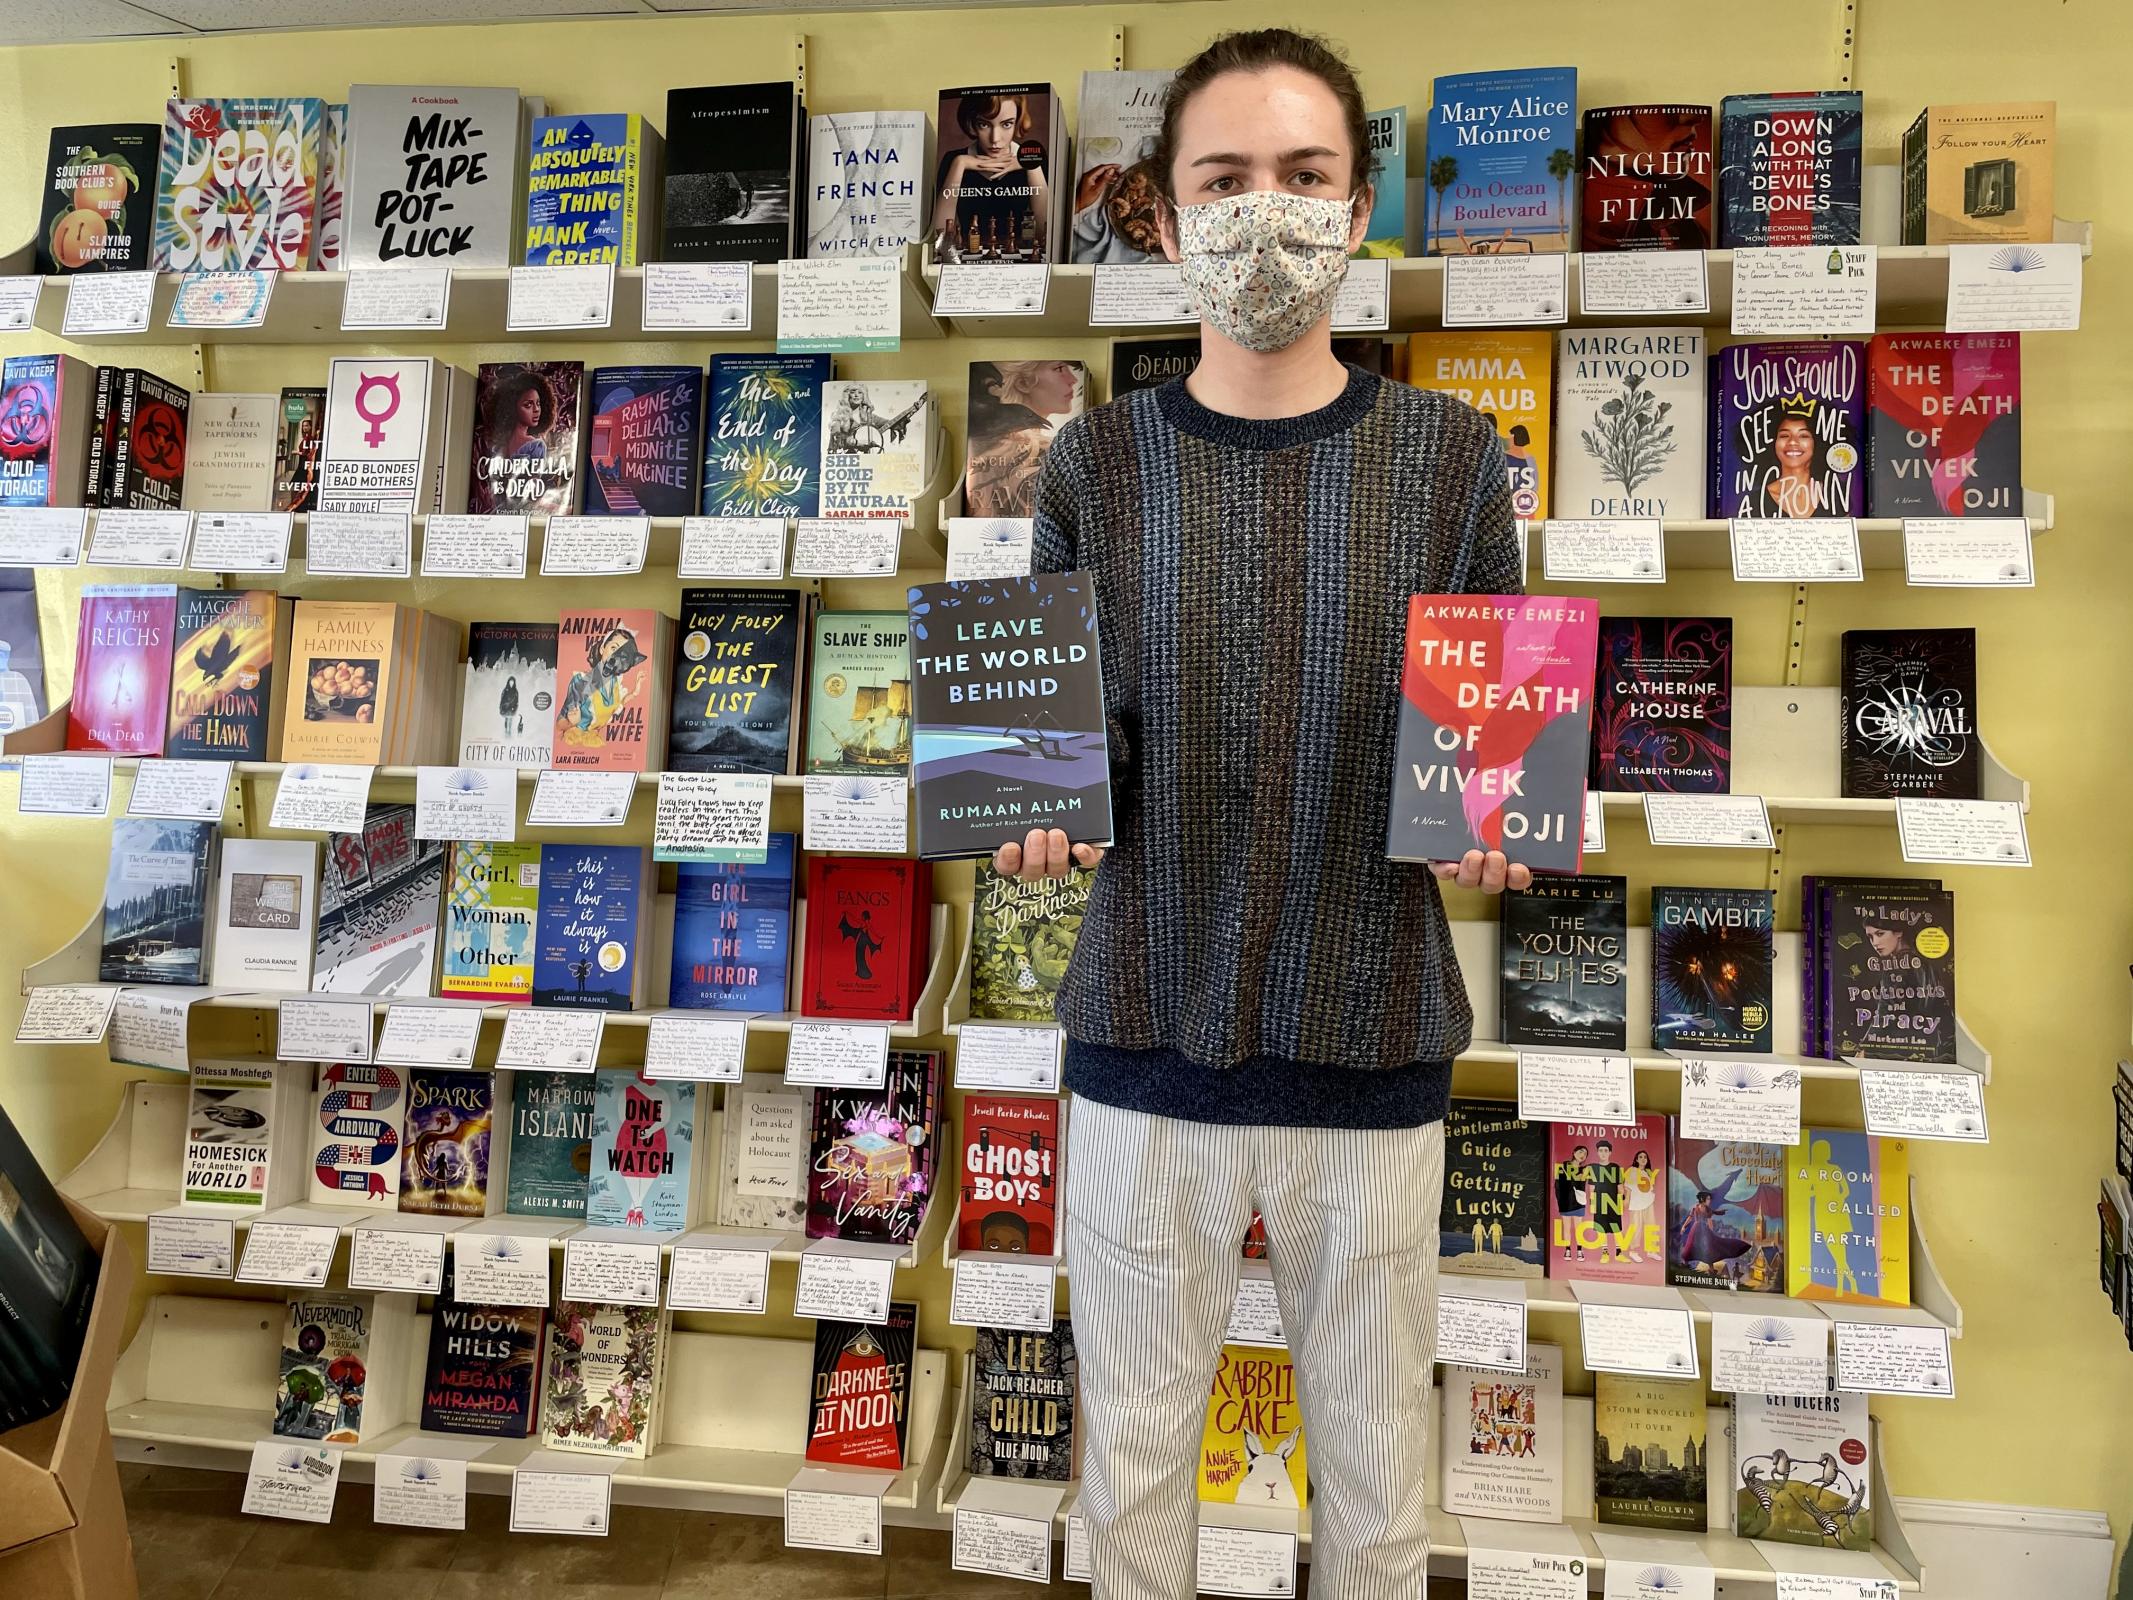 Jack Casey with two favorite books and a wall of staff recommendations